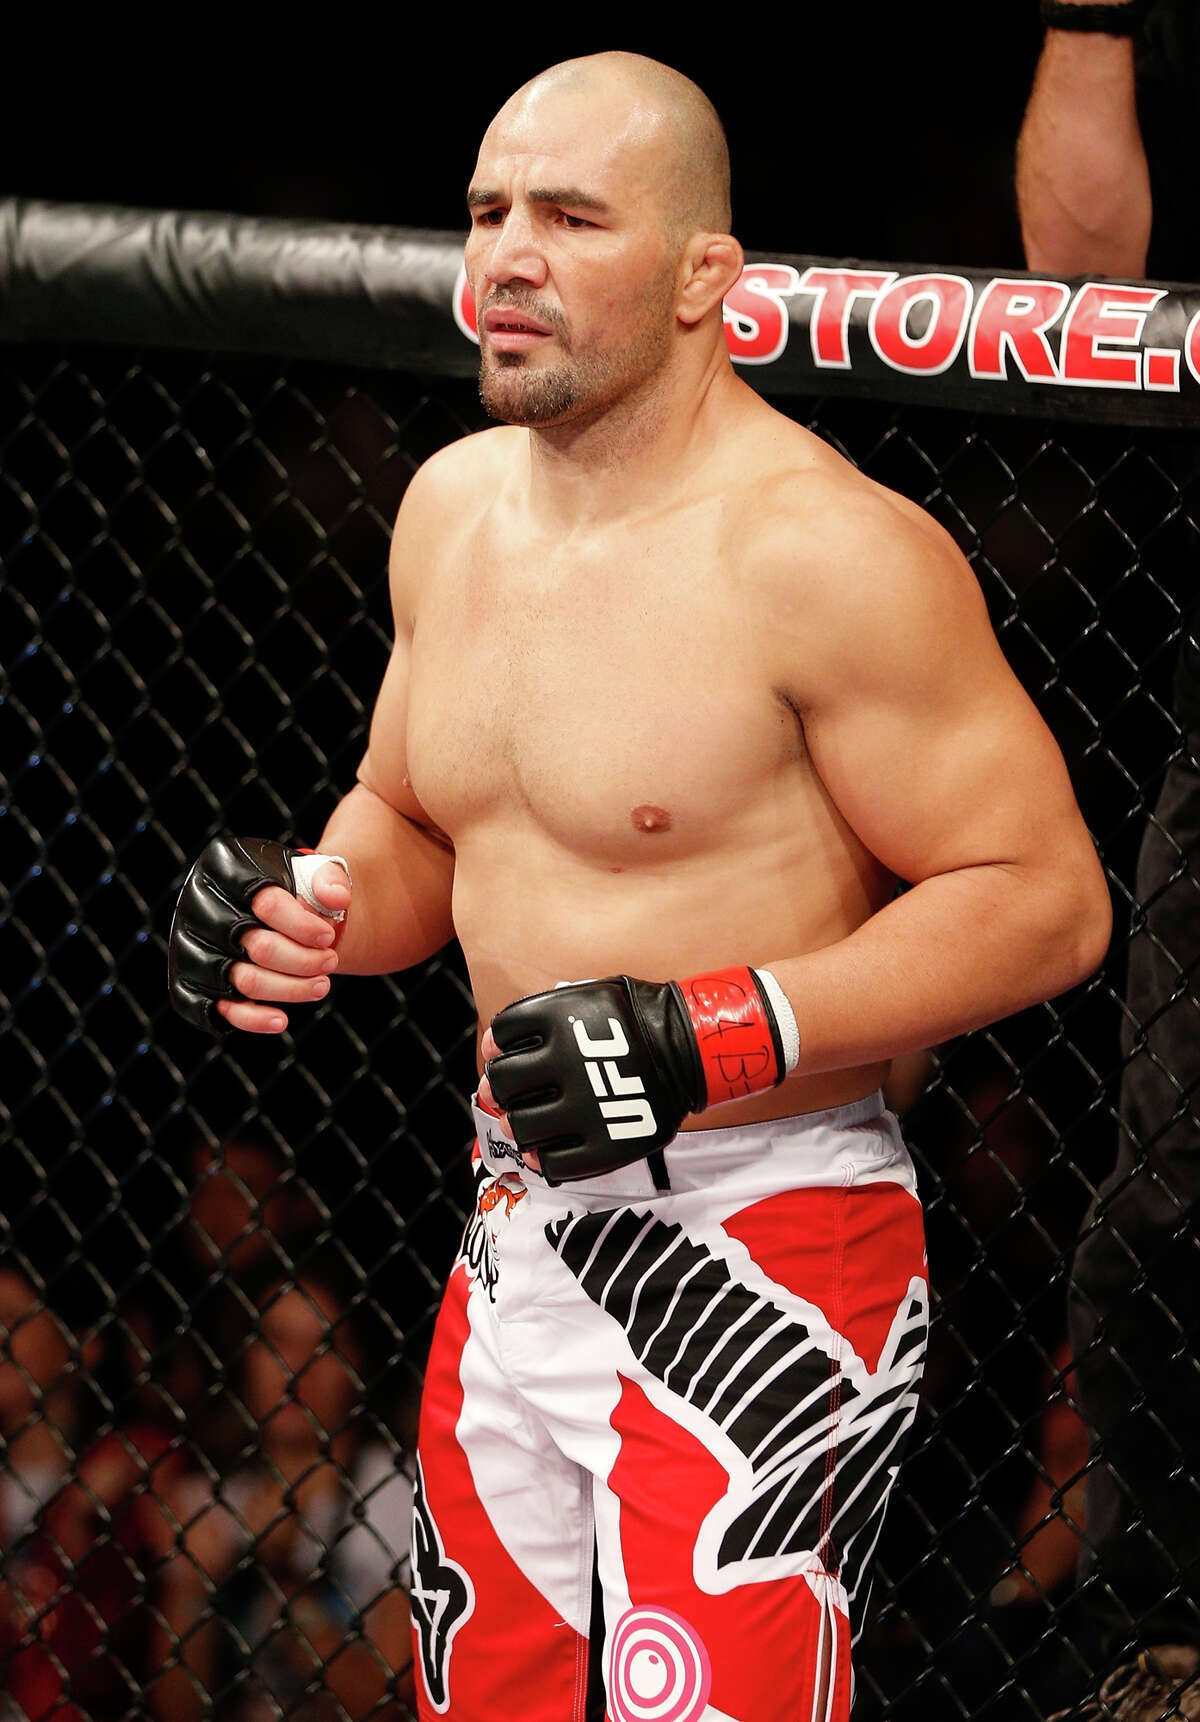 Glover Teixeira stands in the Octagon before his light heavyweight fight against Ryan Bader during the UFC on FOX Sports 1 event at Mineirinho Arena on September 4, 2013 in Belo Horizonte, Brazil.